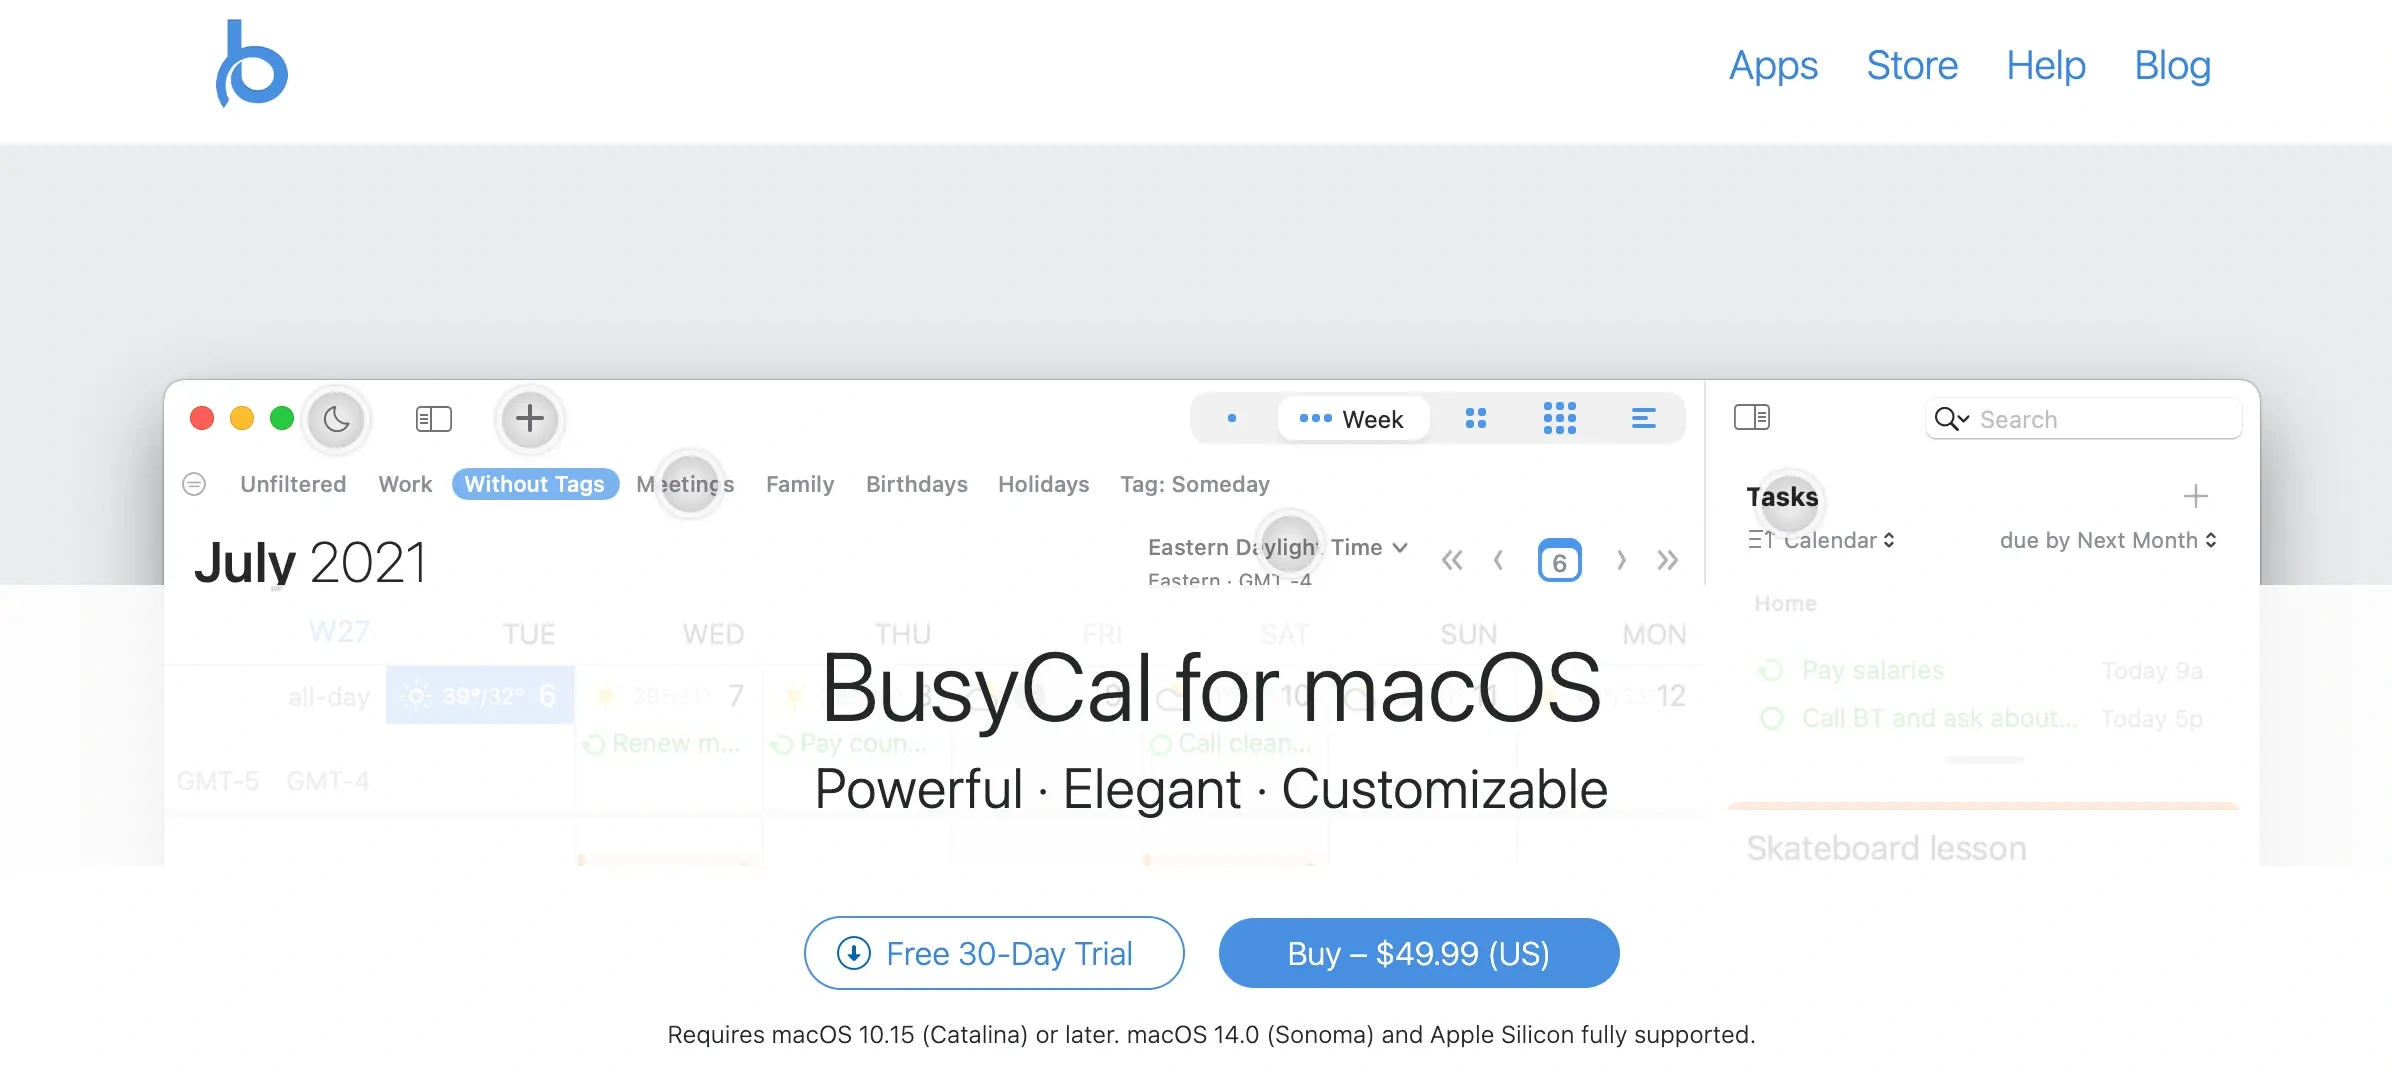 BusyCal for MacOS